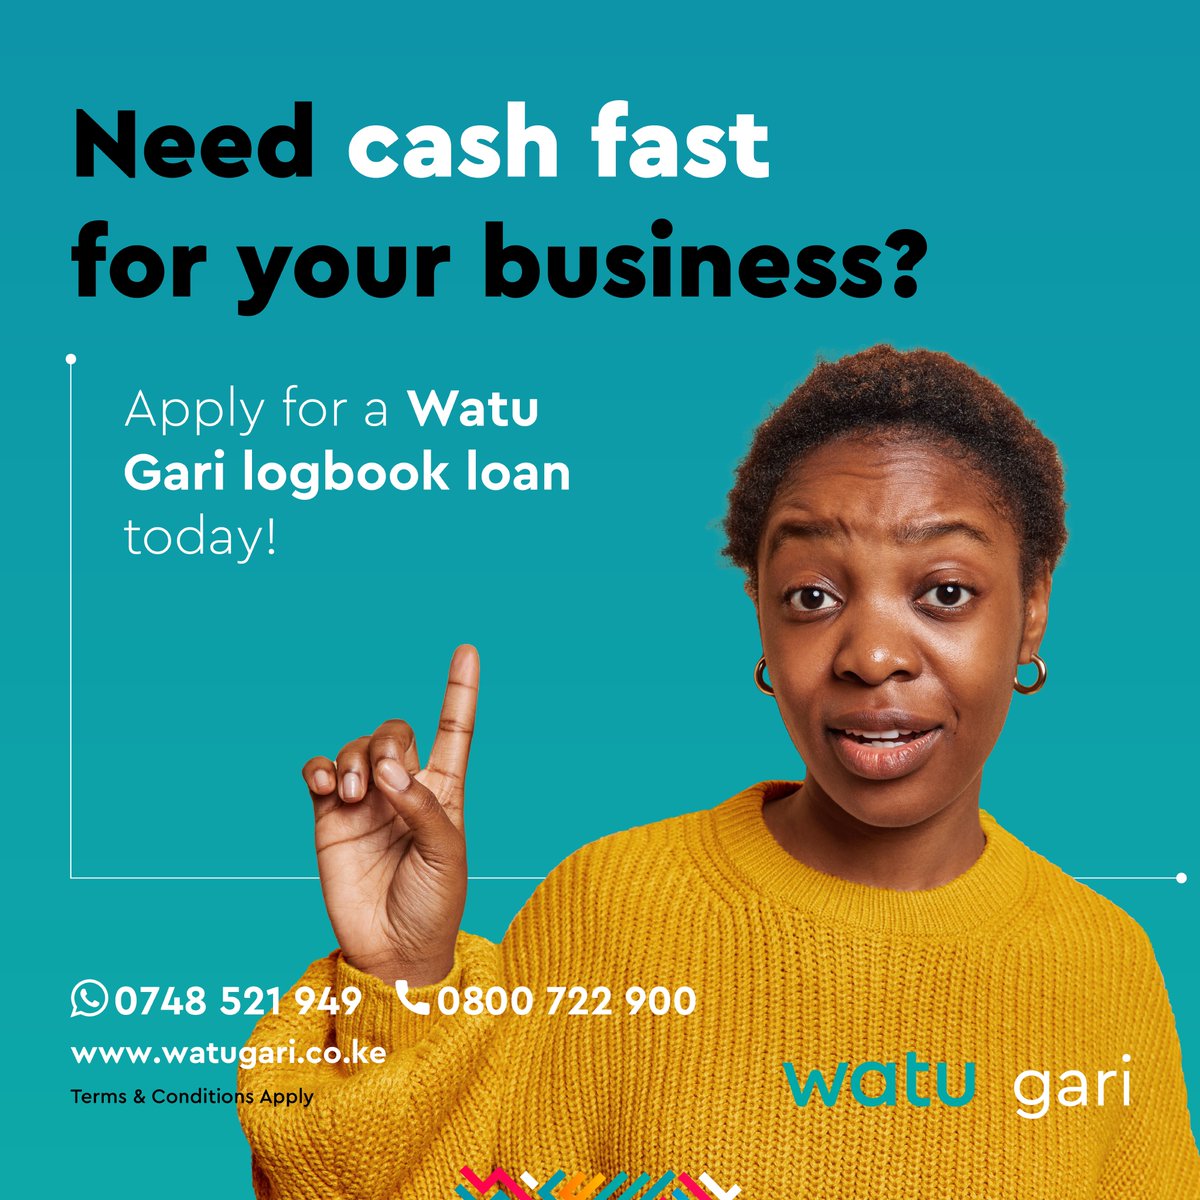 Do not get stuck because of lack of cash flow in your business. 

Call us on 0800 722 900 OR visit us at #NgongRoad OR #KiambuRoad to apply today!  

Apply online: watugari.co.ke 

We are on WhatsApp: 0748 521949  

#DriveNdotoZako with Watu Gari's #carfinancing.